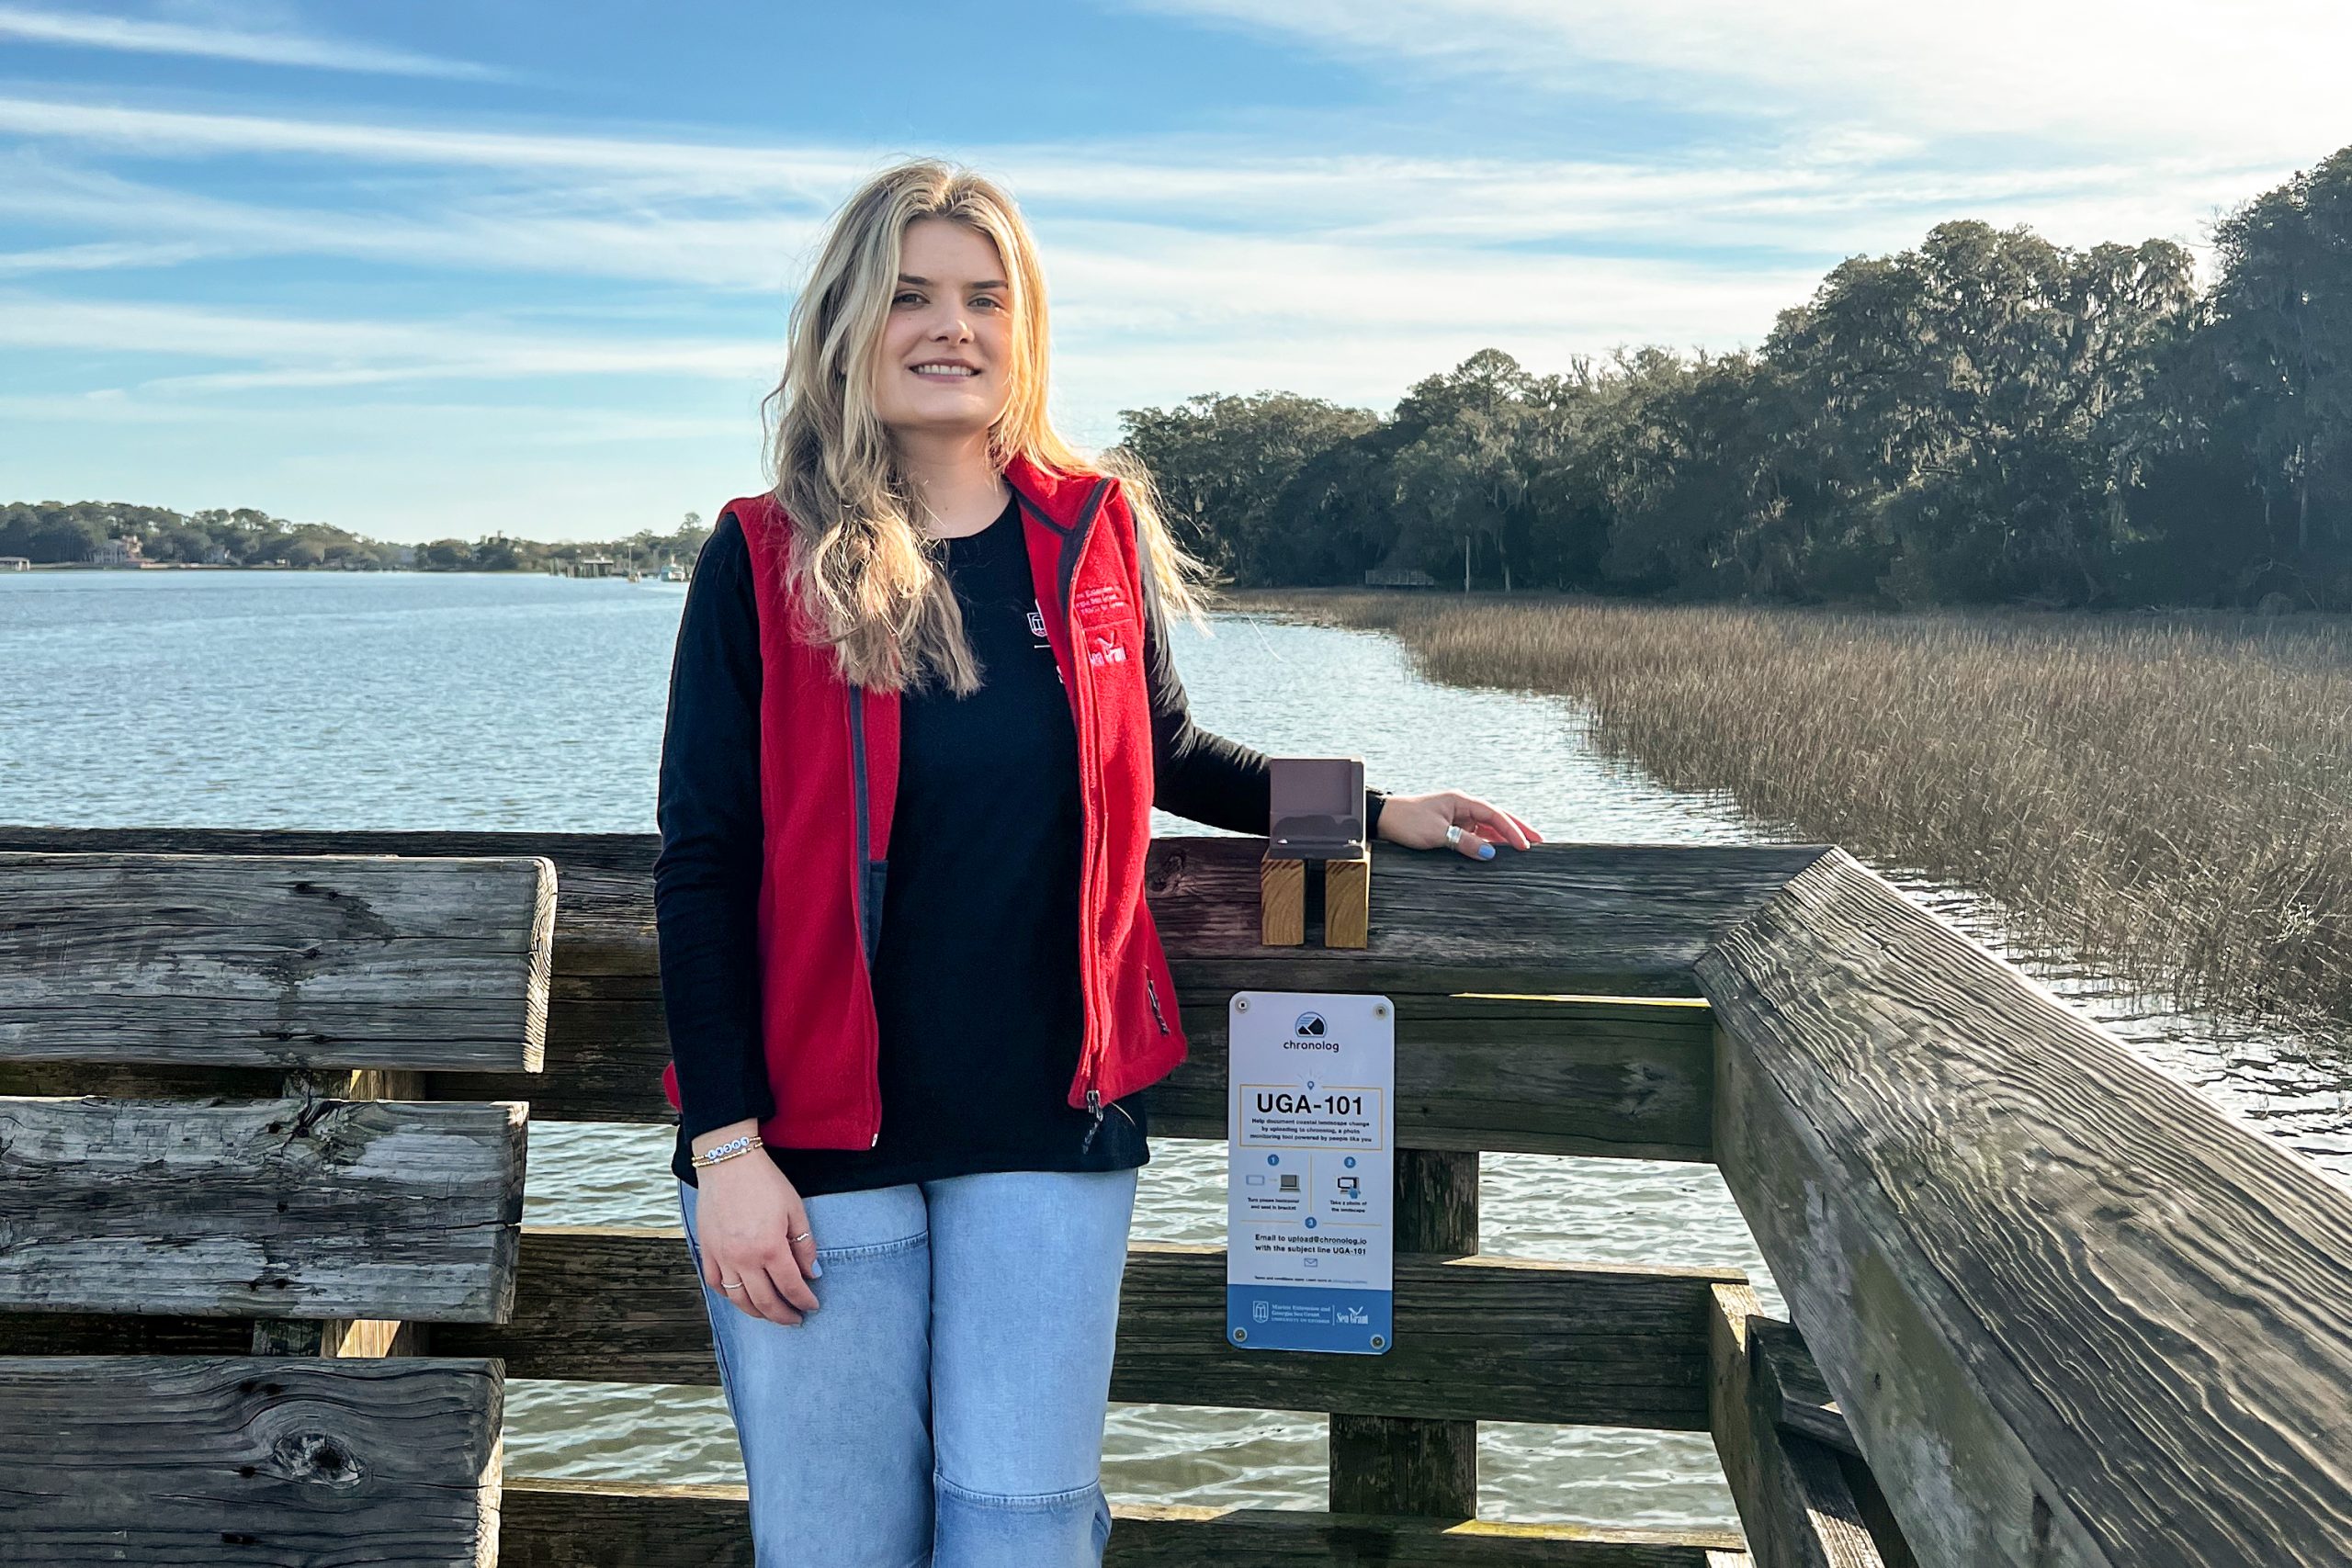 a young woman with blonde hair stands on a wooden observation dock overlooking a marsh and waterway